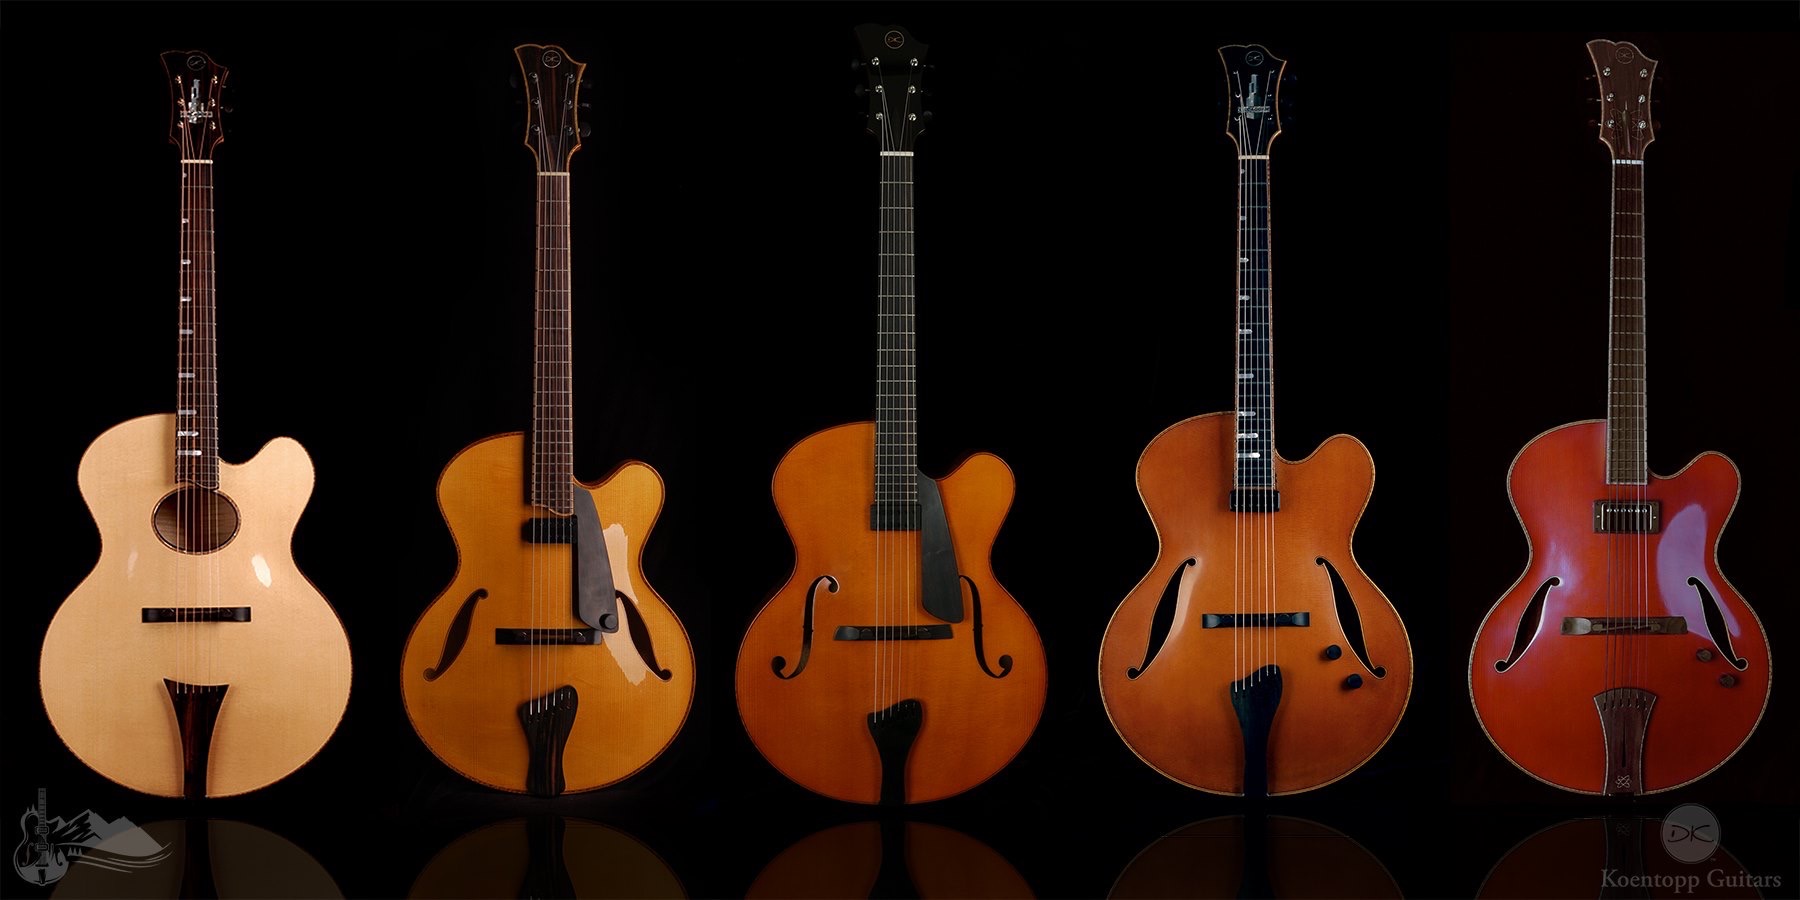 Lineup of Koentopp archtops from the Rocky Mountain Archtop festival l Source: Facebook